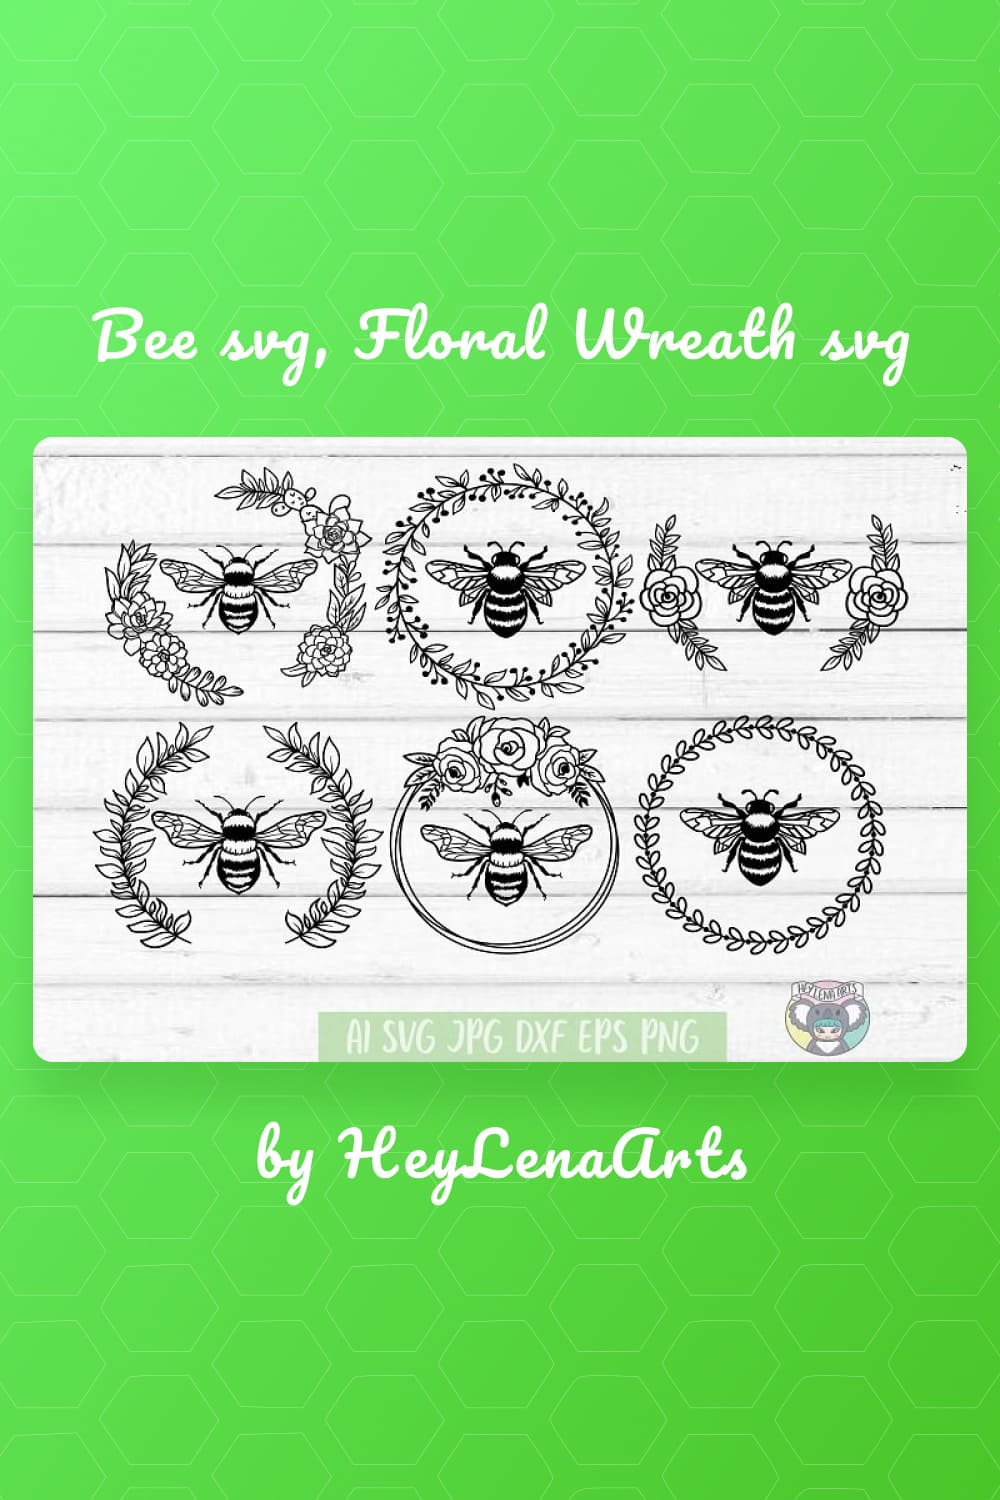 Bee SVG, Floral Wreath SVG preview of Pinterest image.